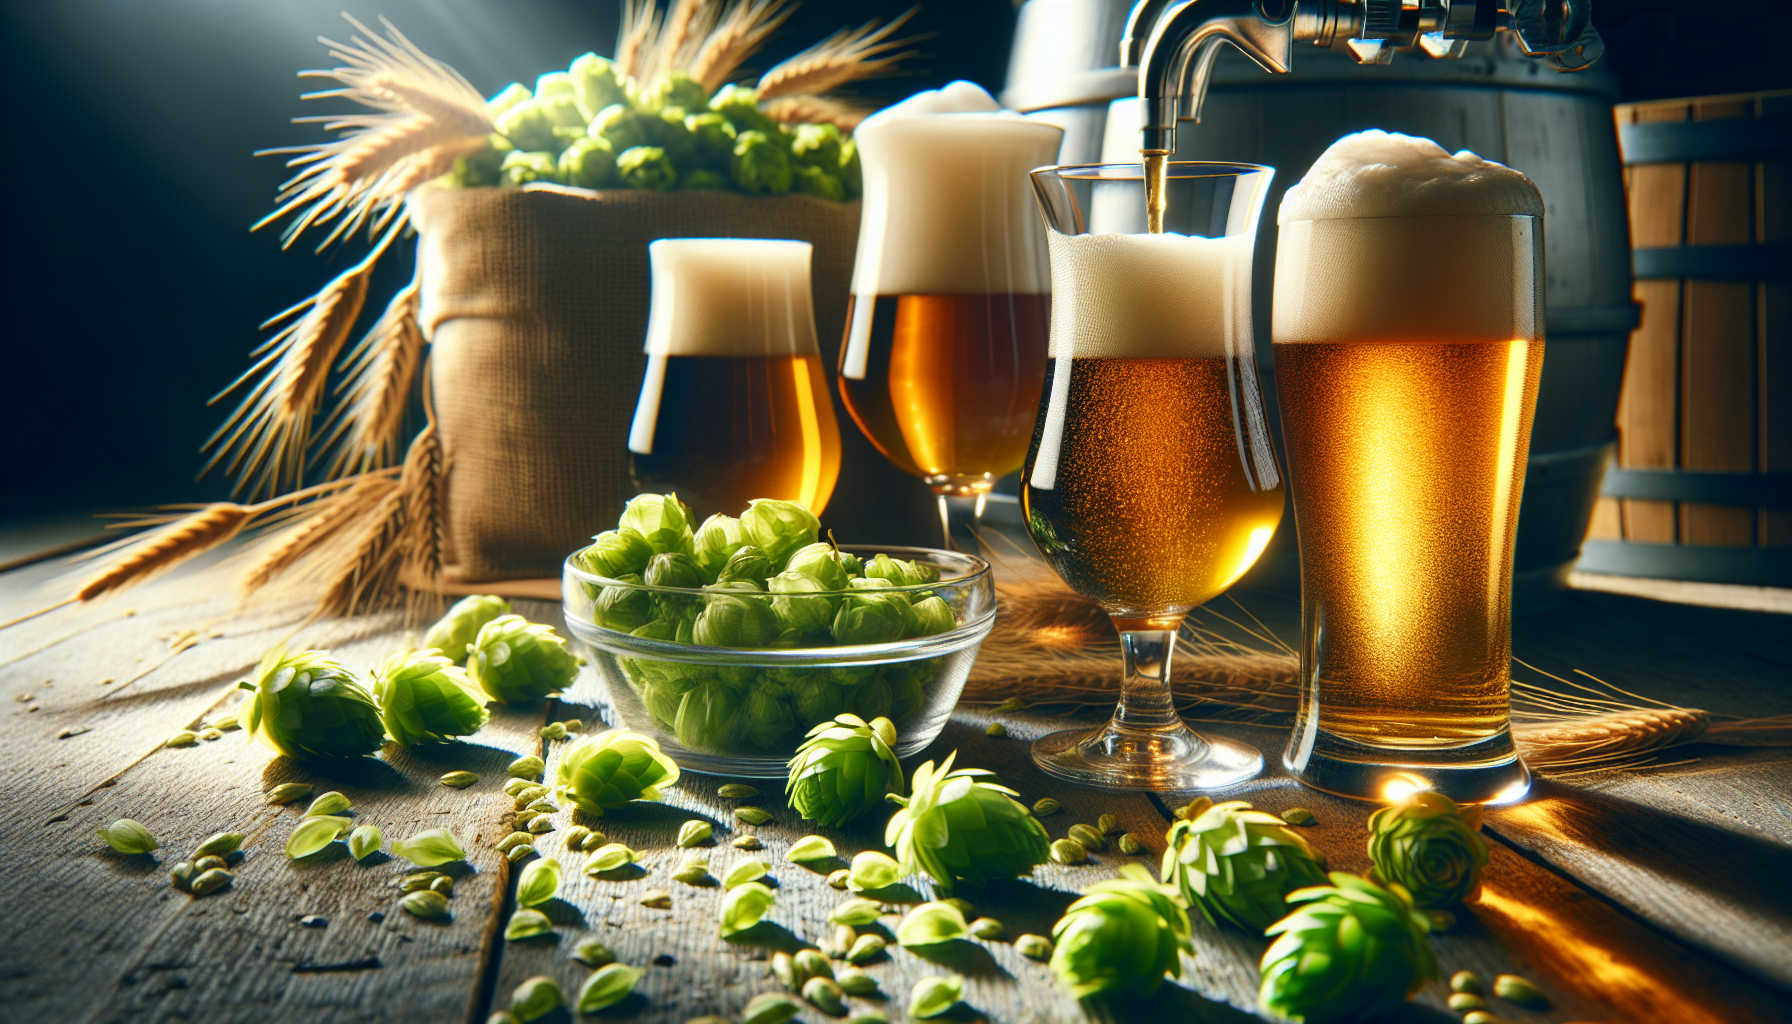 What are the key elements to consider during a beer tasting experience?